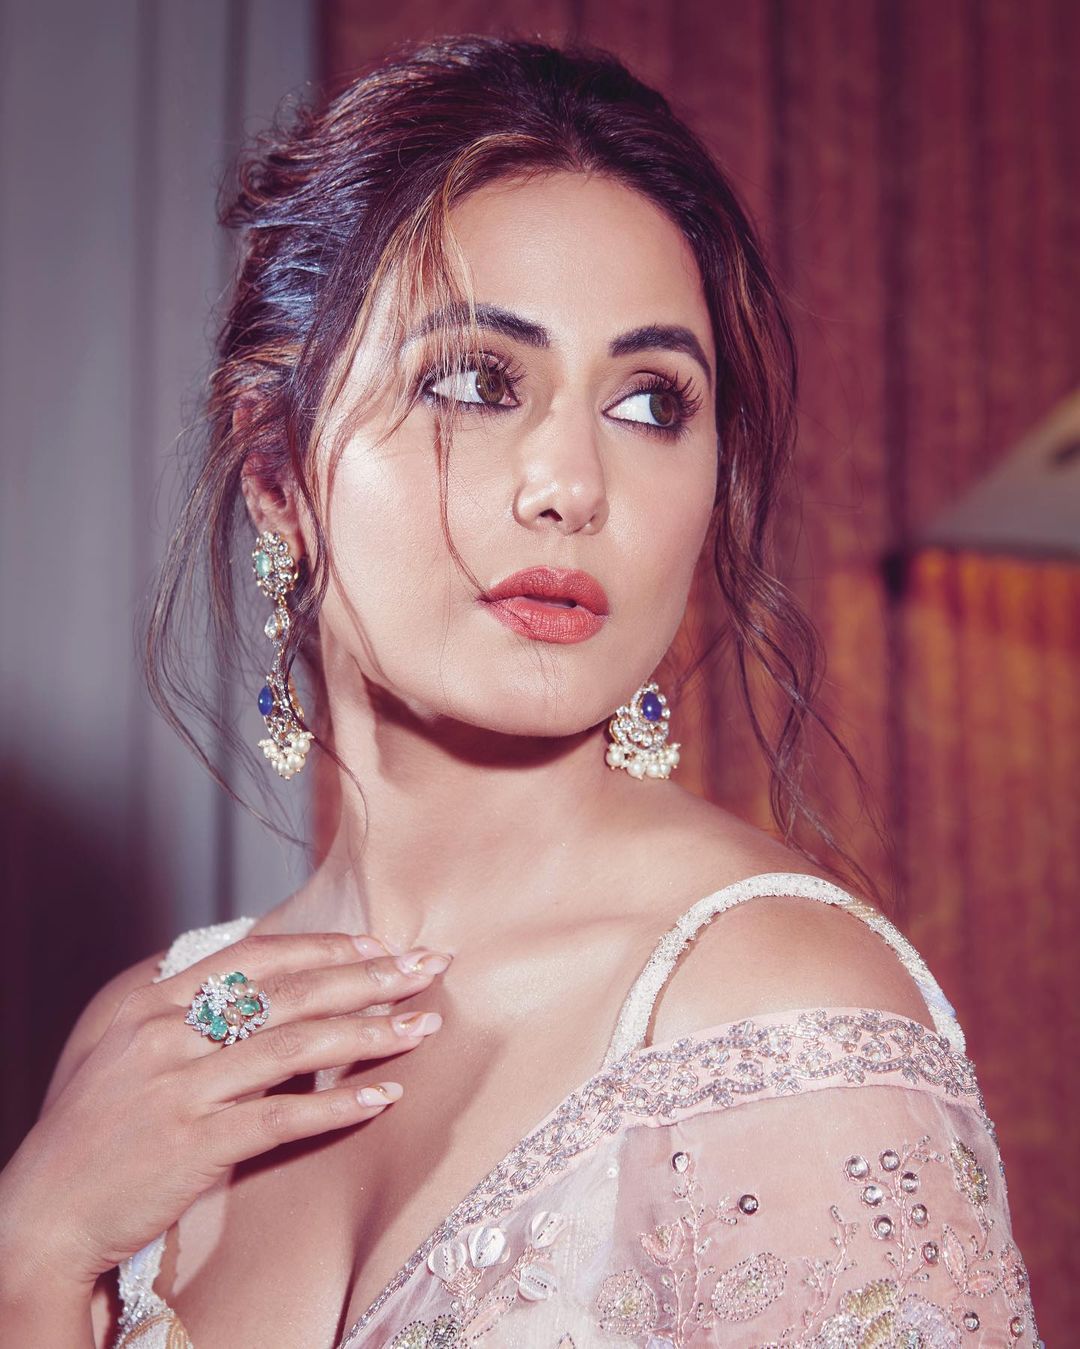 Hina Khan complements the eye makeup with bright red lips